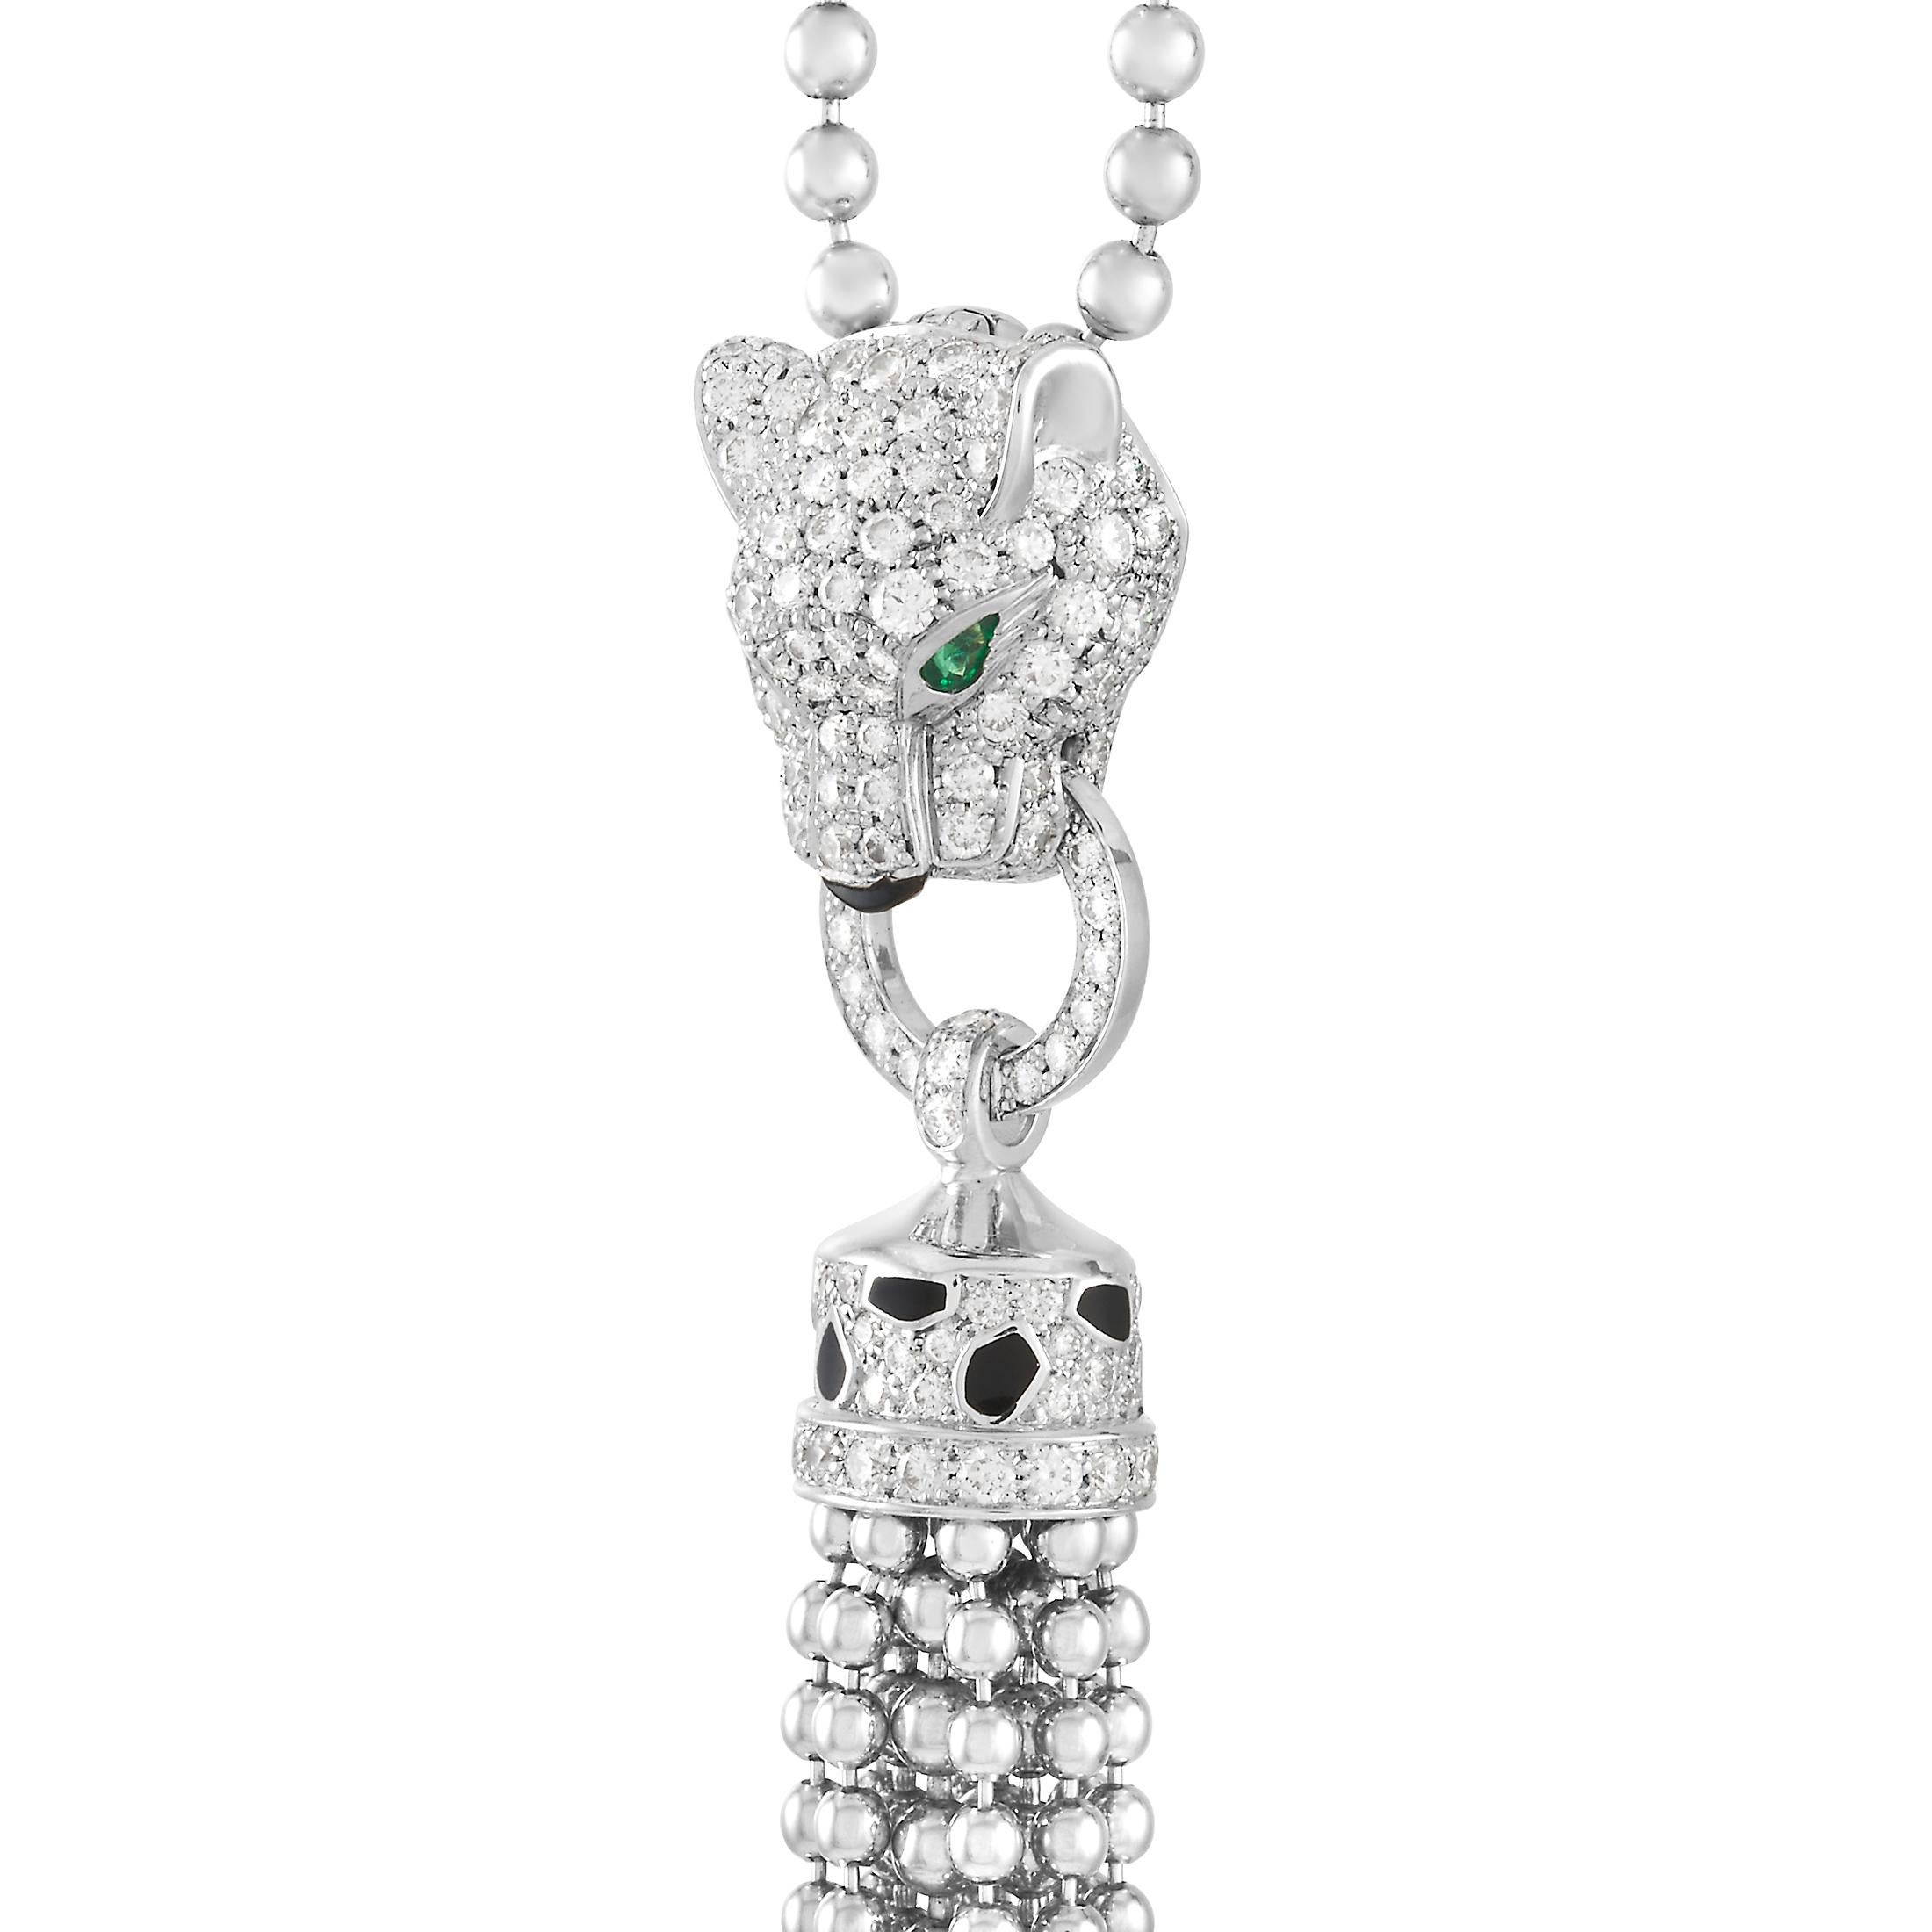 The perfect combination of playful and sophisticated, this necklace from Cartier proves that luxury can come in a variety of forms. This stylish design is crafted from 18K White Gold and features the brand’s iconic Panther, which comes to life